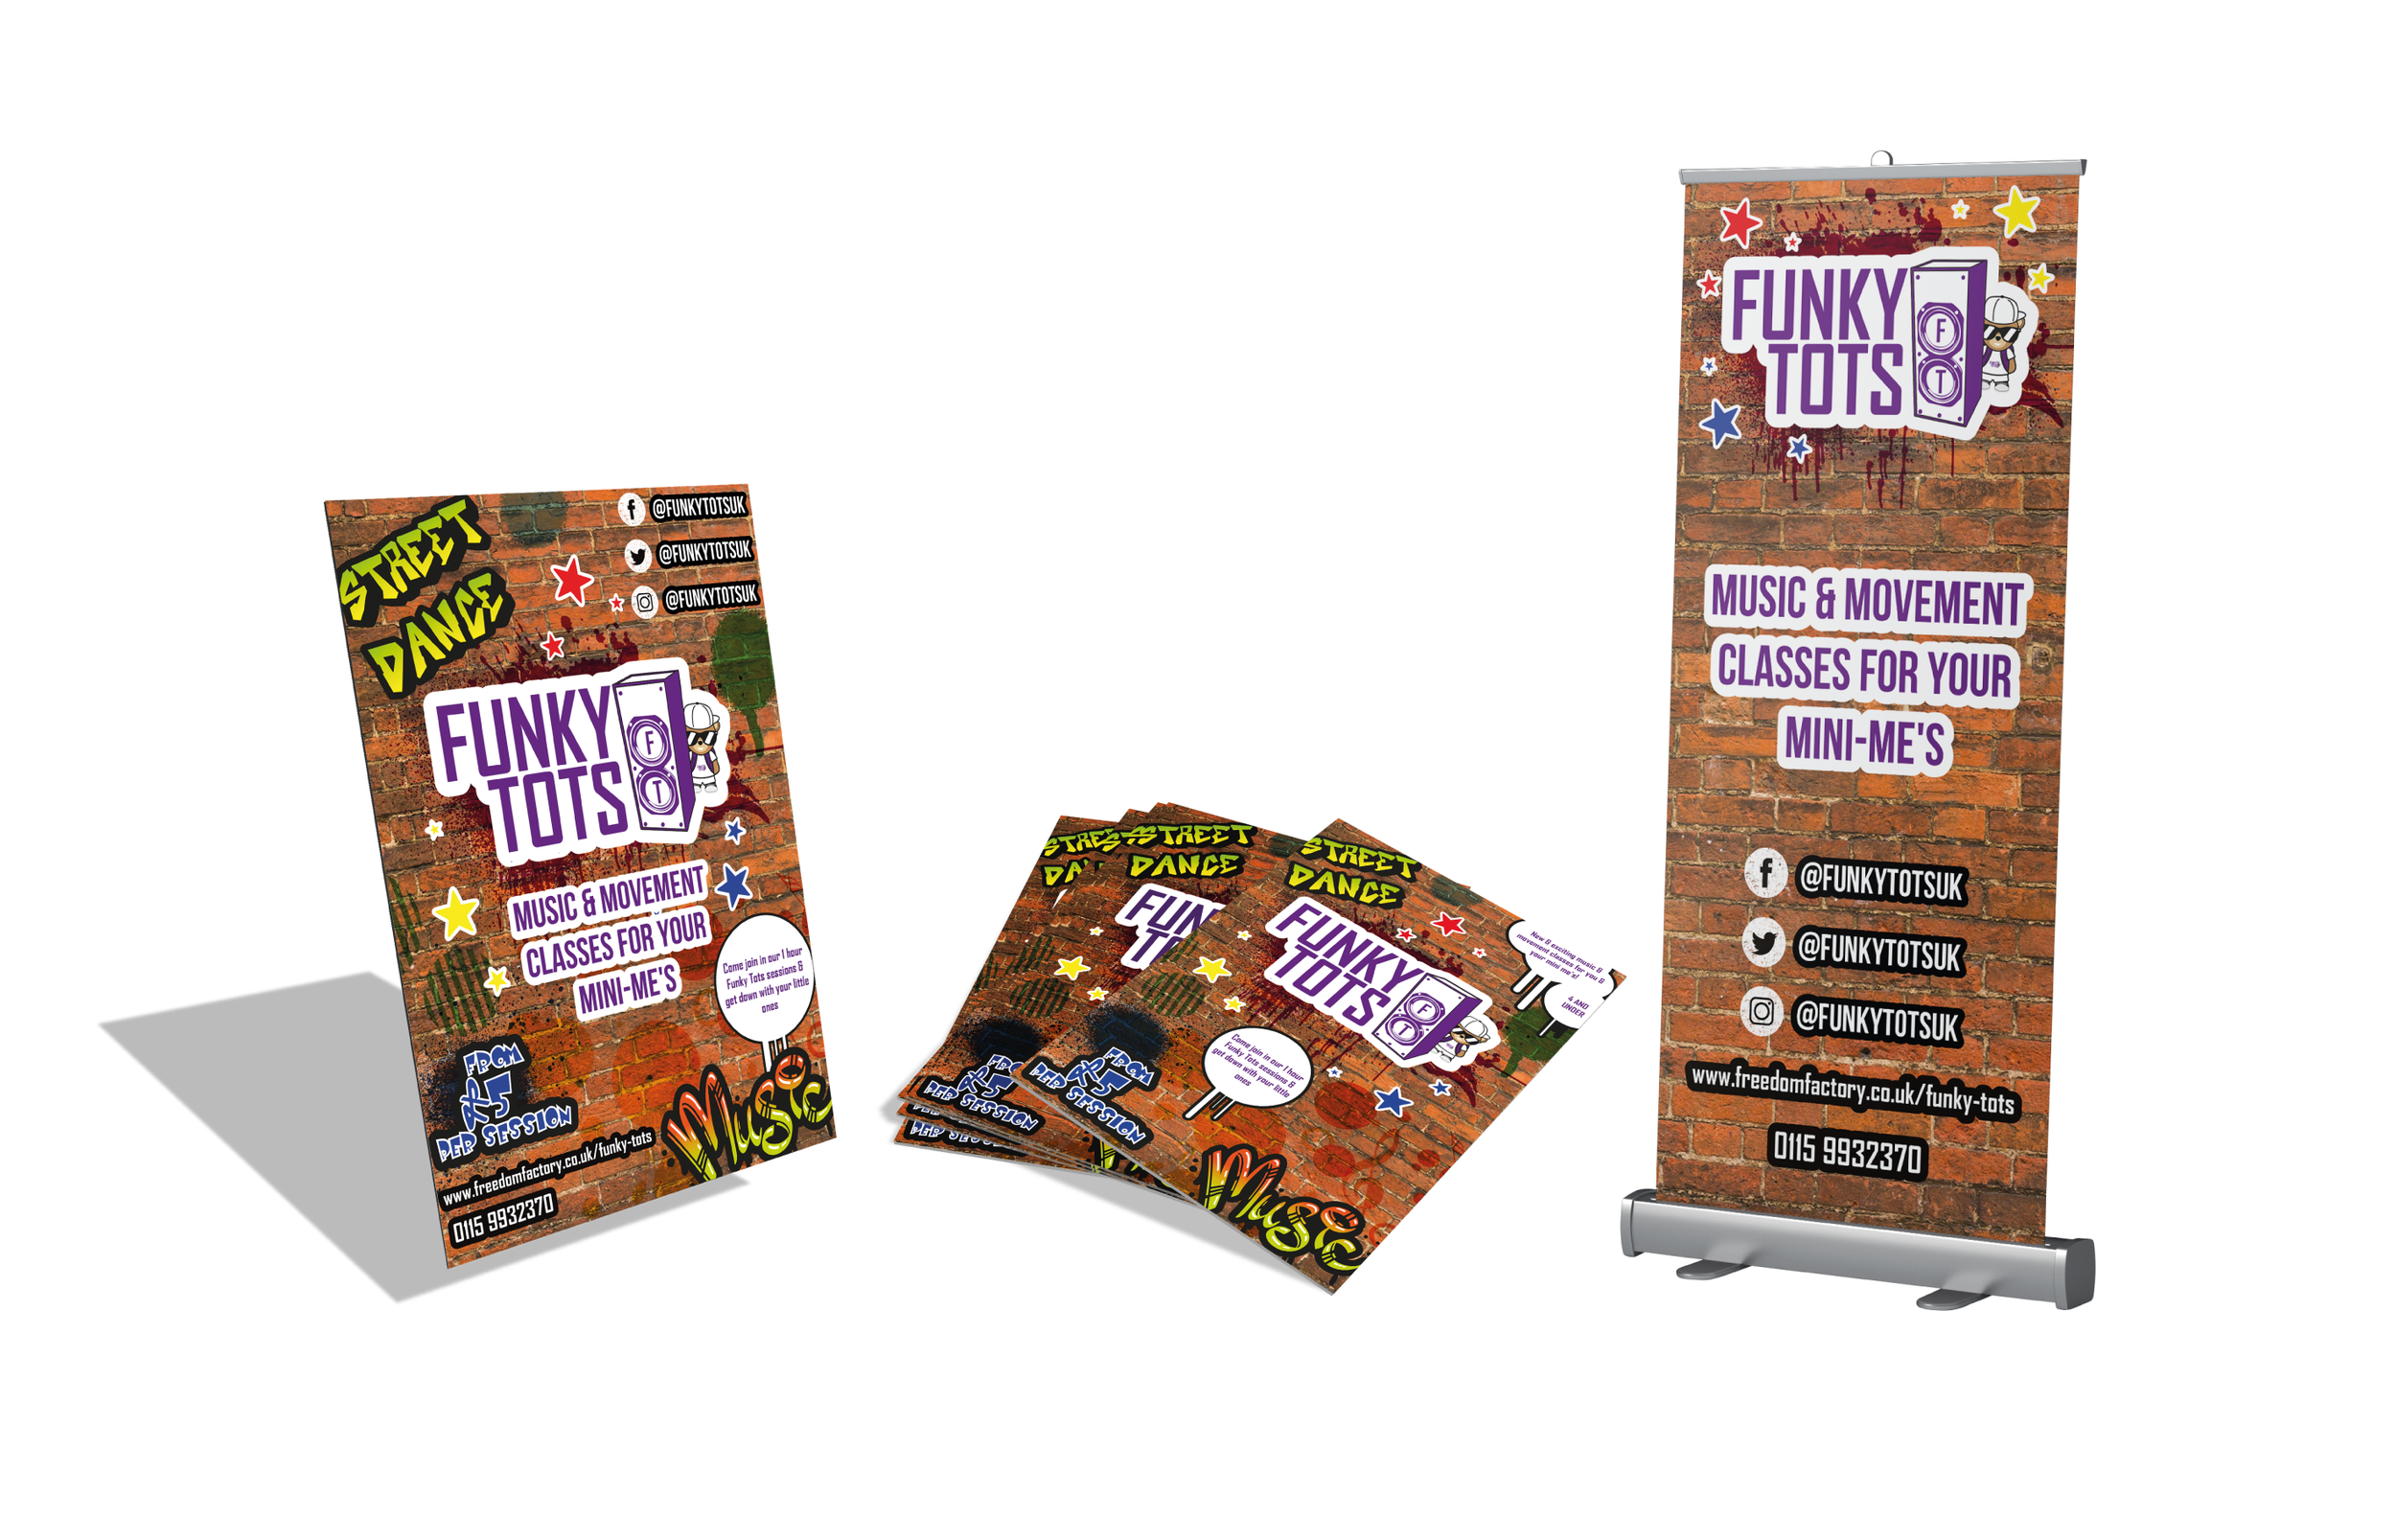 Funky Tots Design and Printed Marketing Material